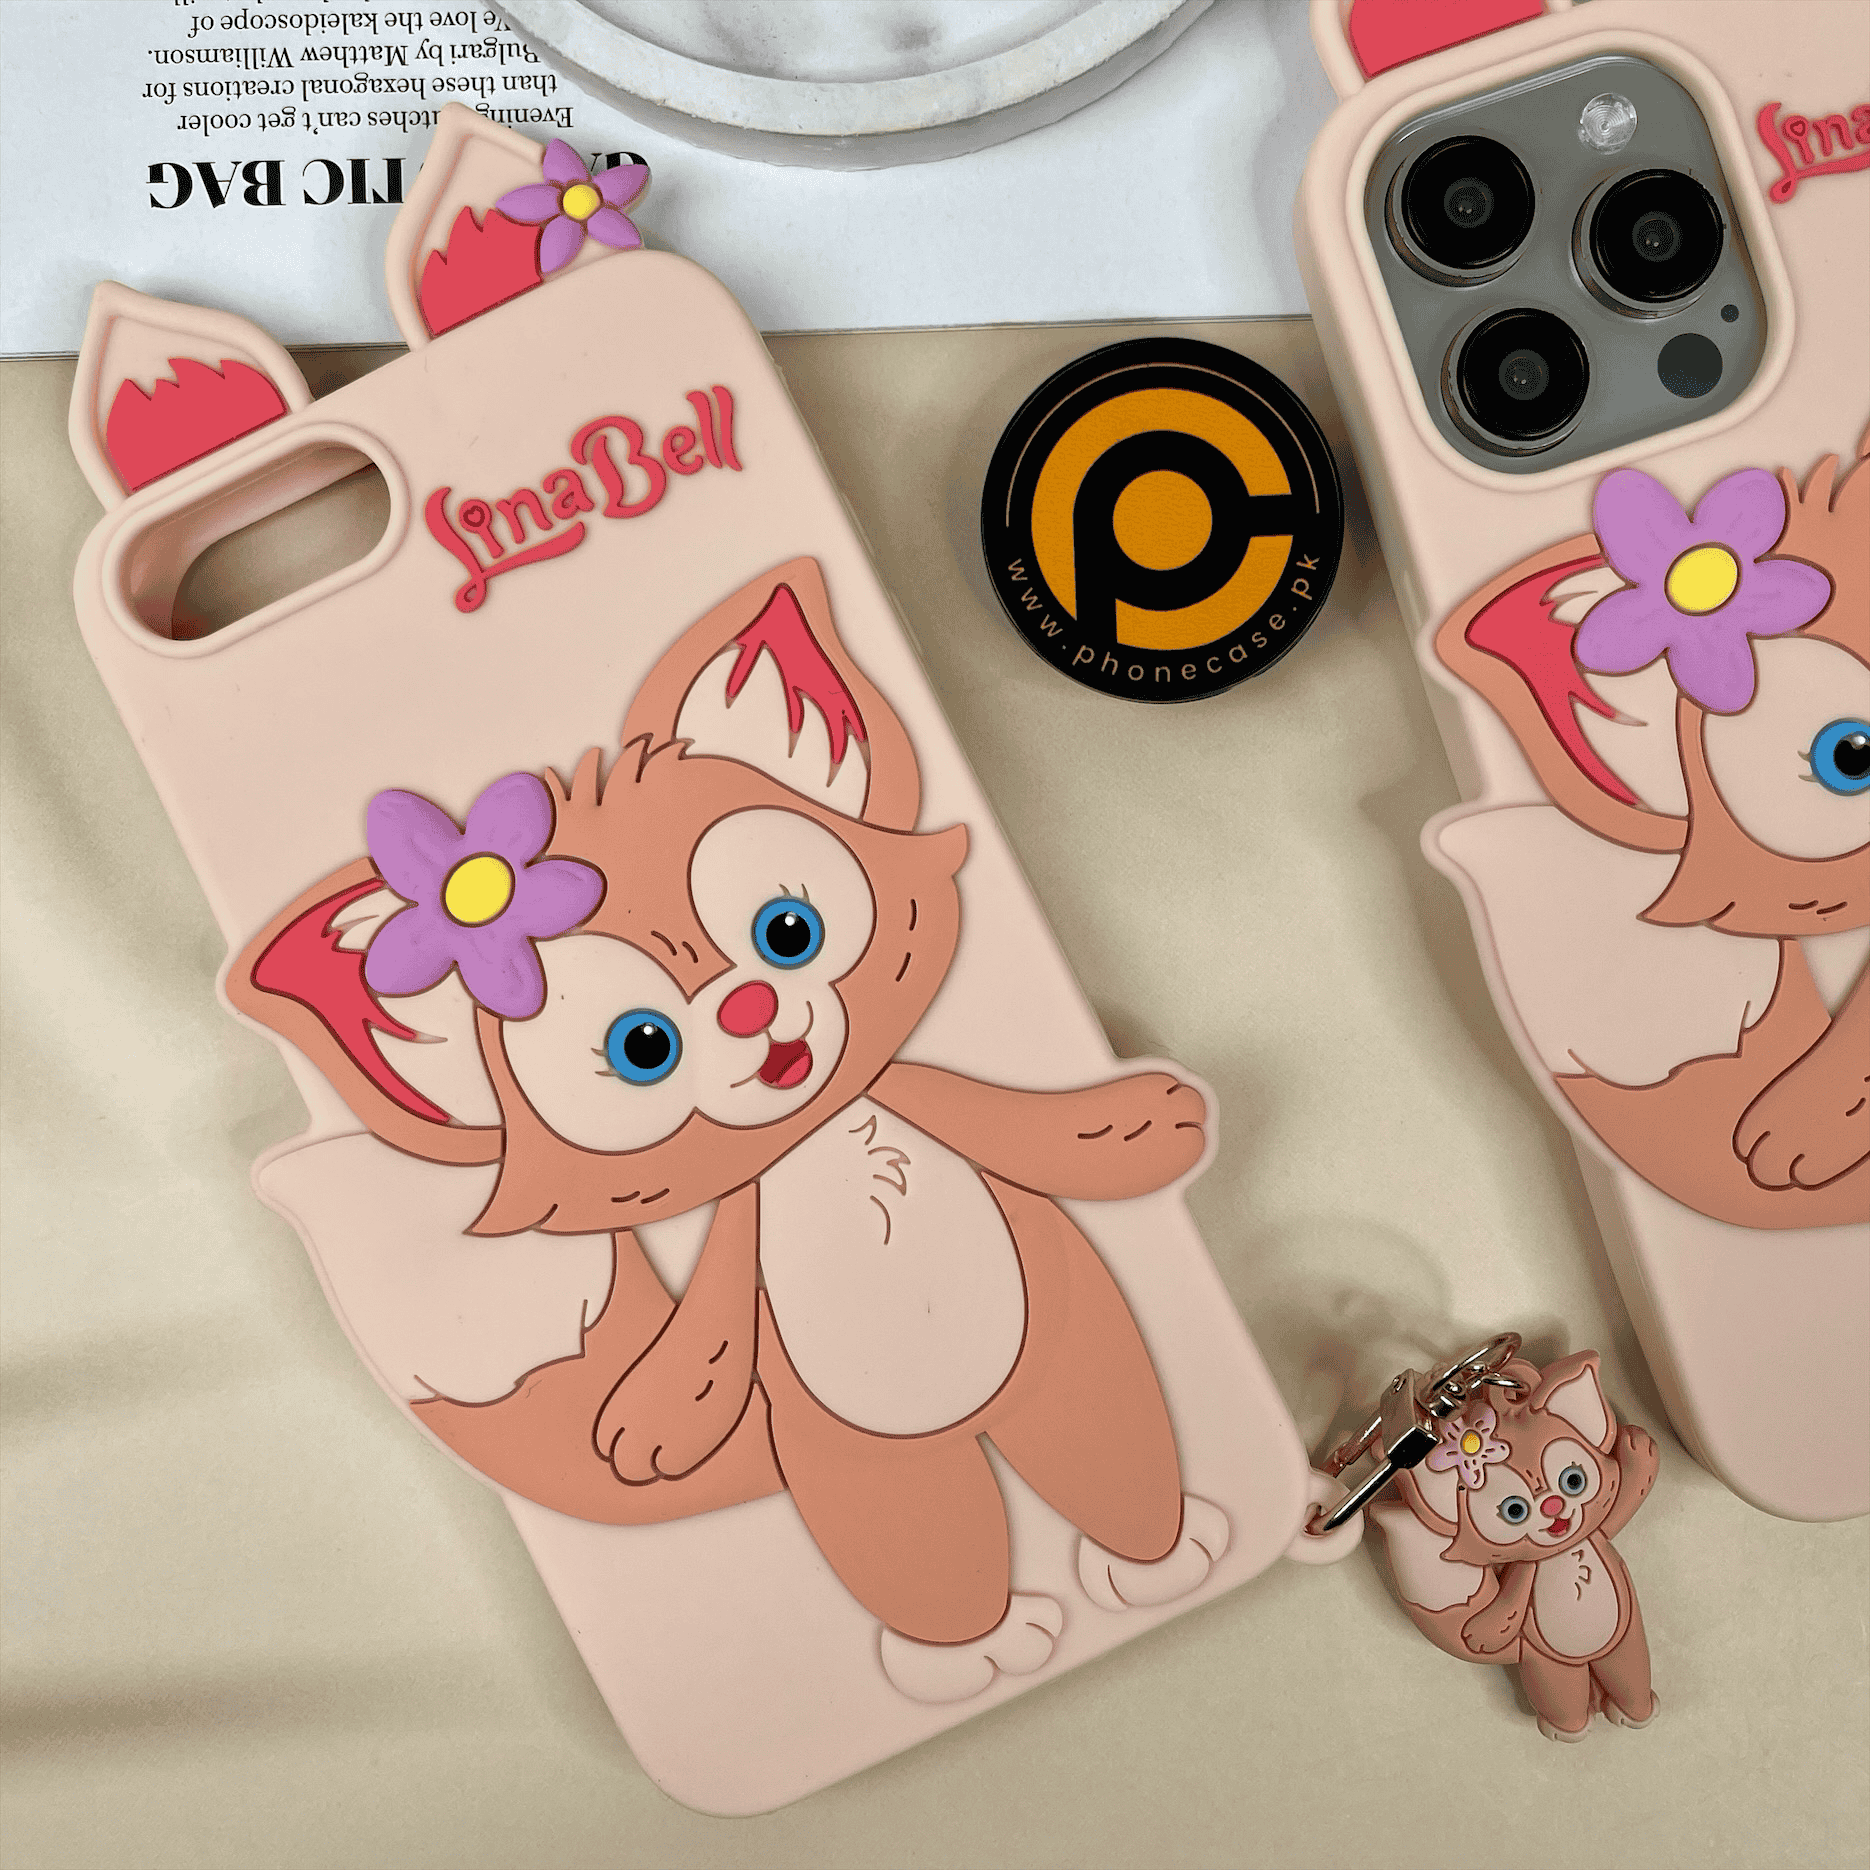 iPhone All Models Lina Bell Cartoon Silicon ShockProof Rubber 3D Case with Free pendant